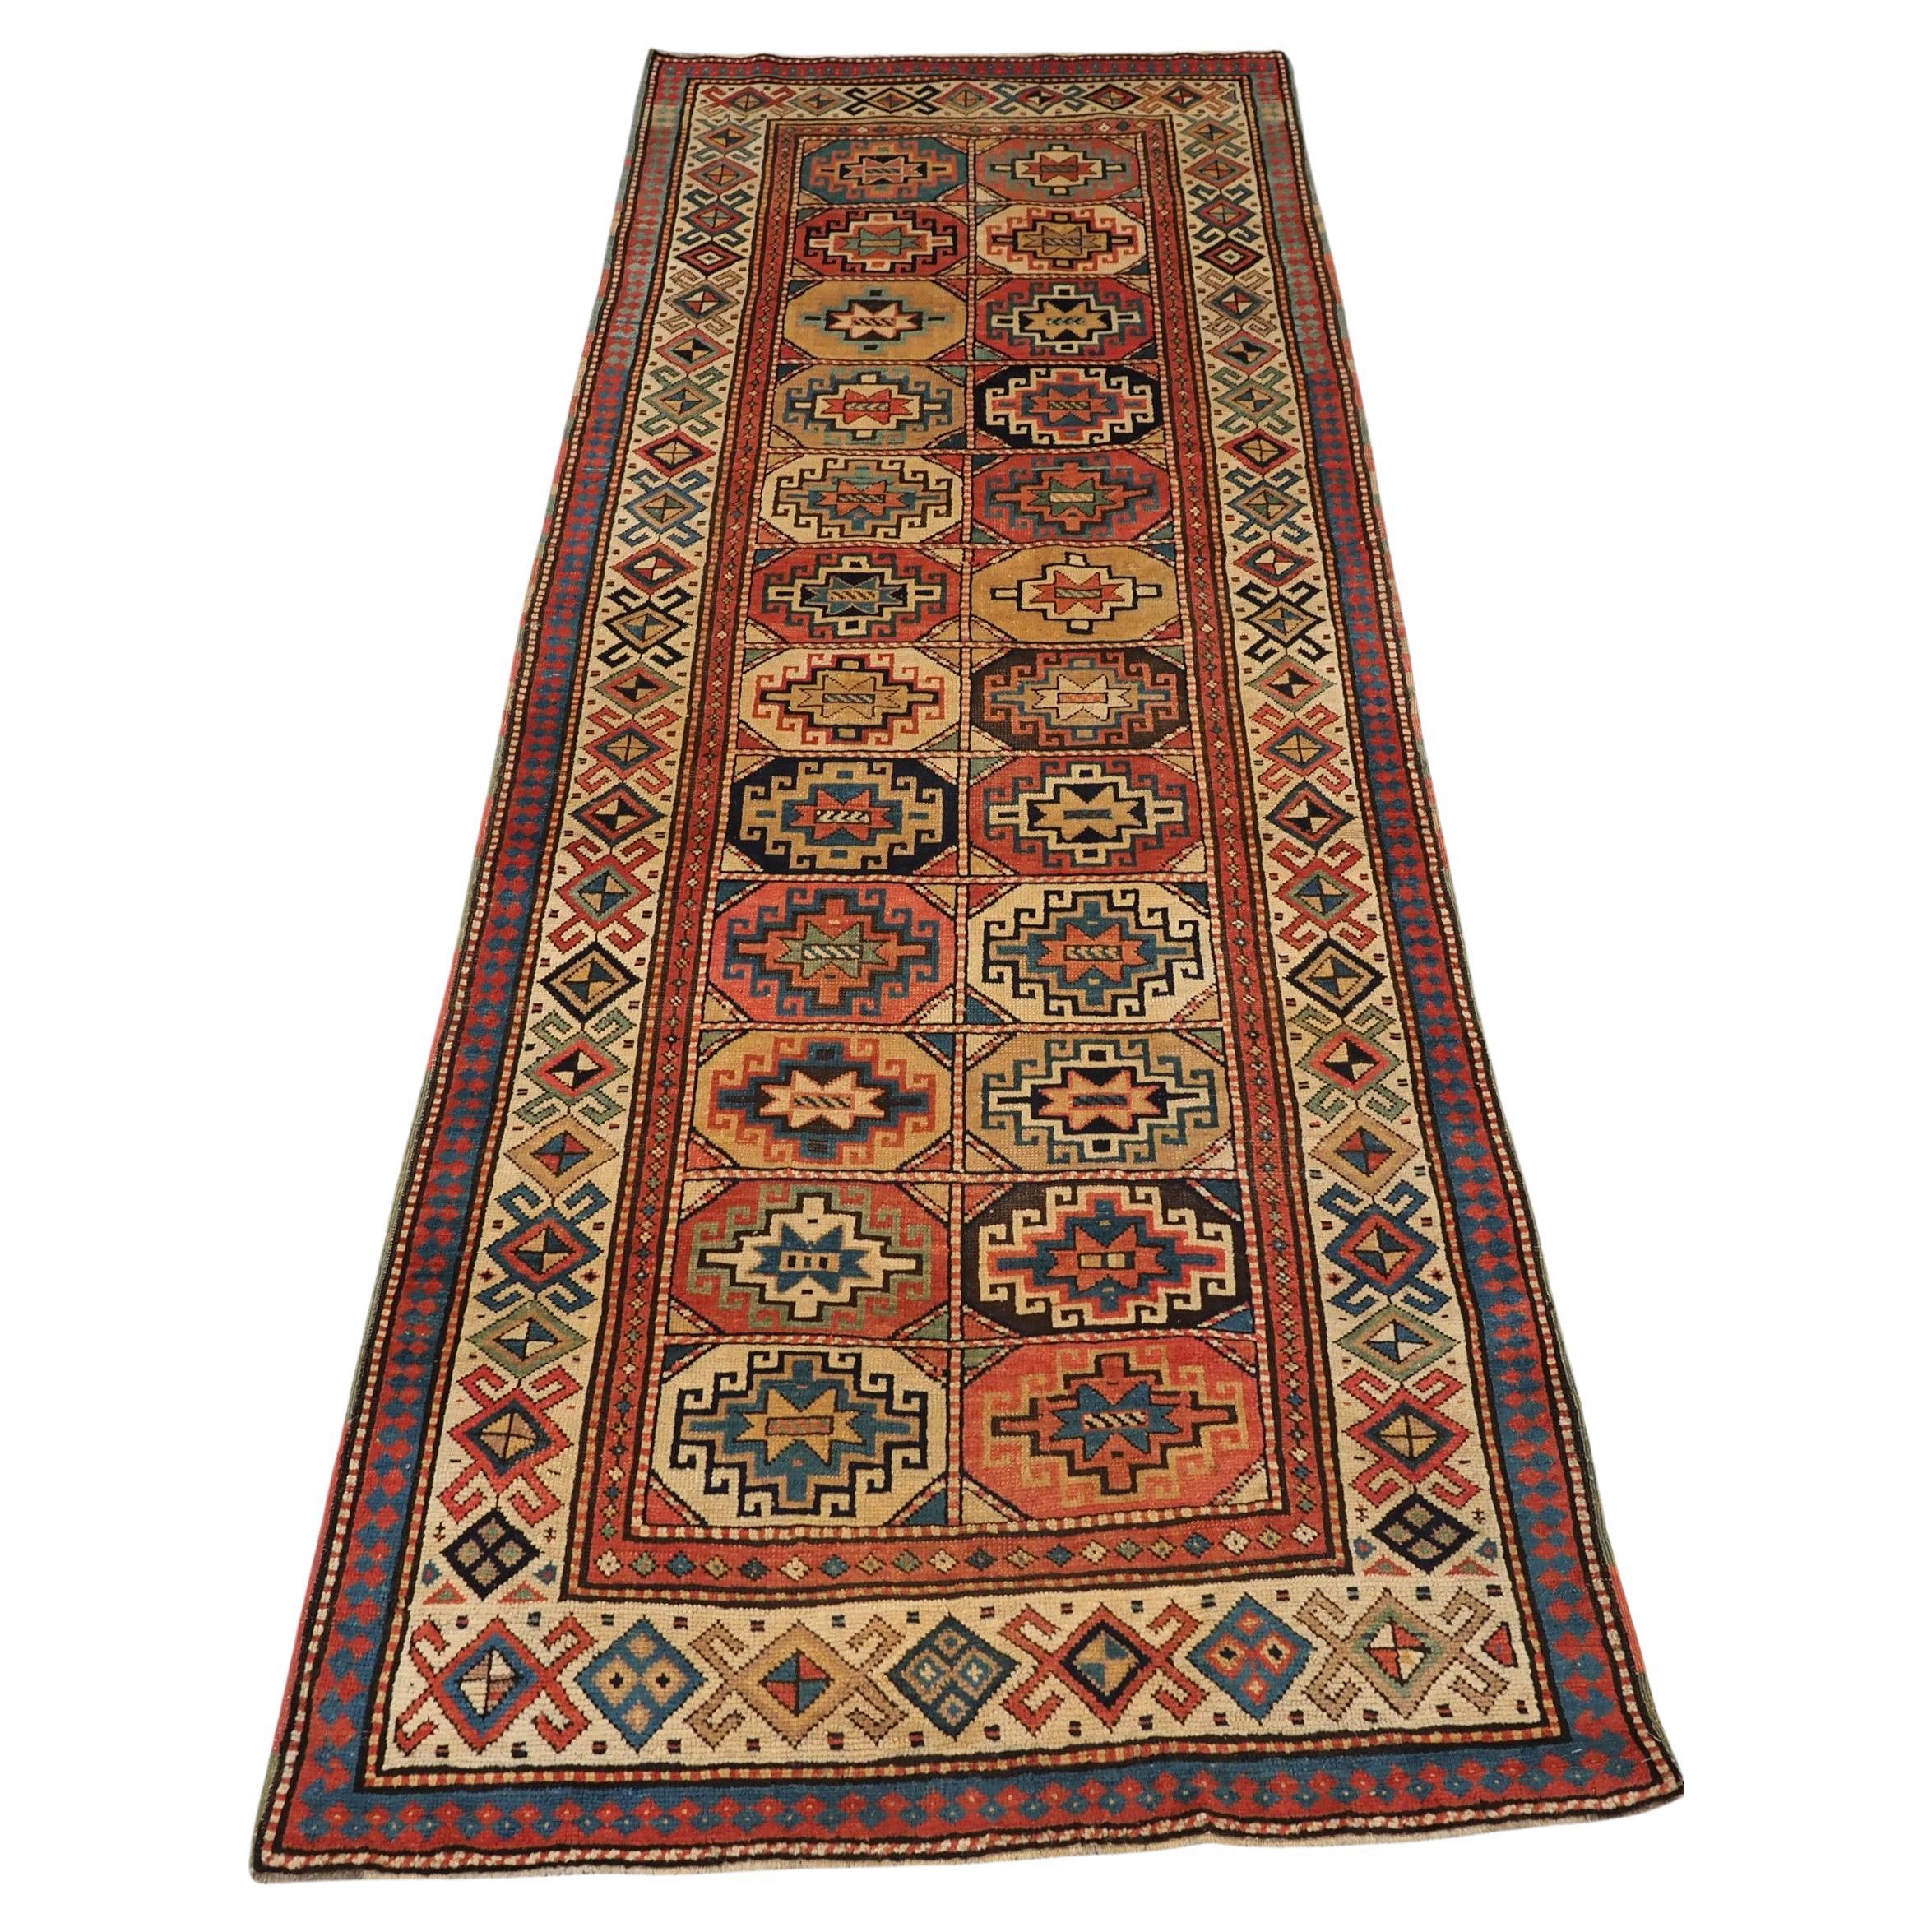 Antique South Caucasian Moghan Kazak long rug with Memling guls within octagons.